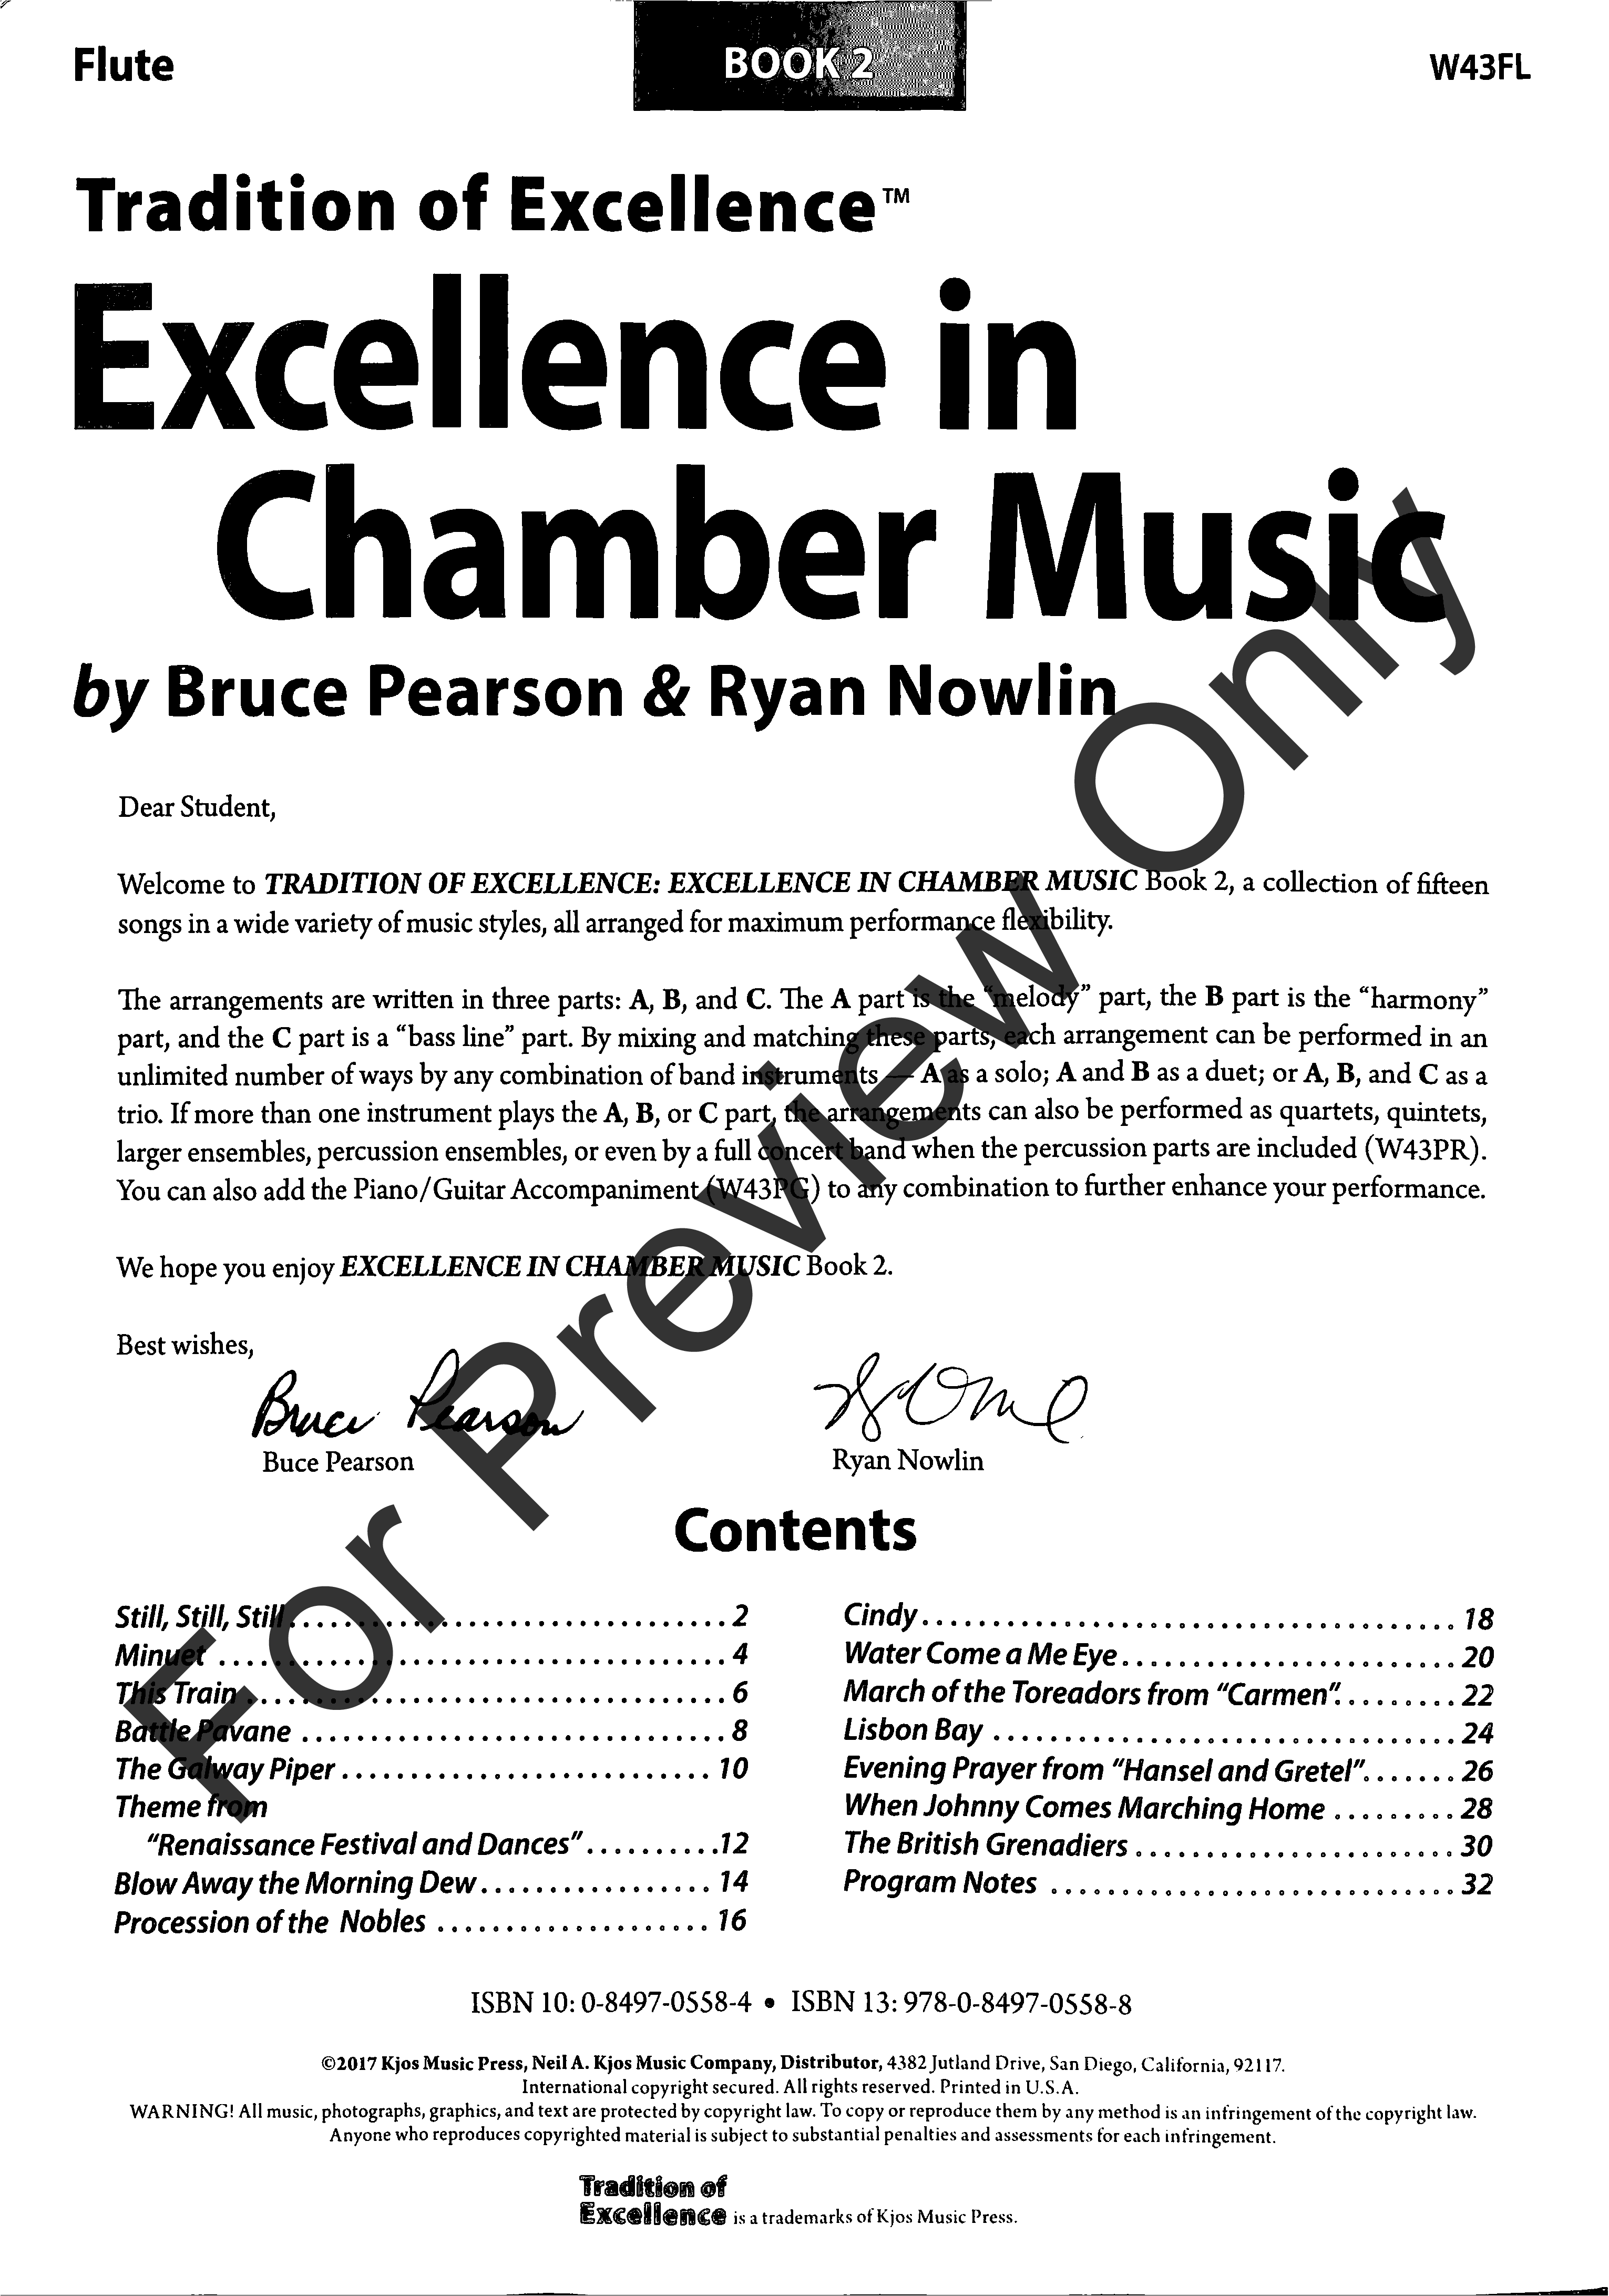 Excellence in Chamber Music #2 Flute Book